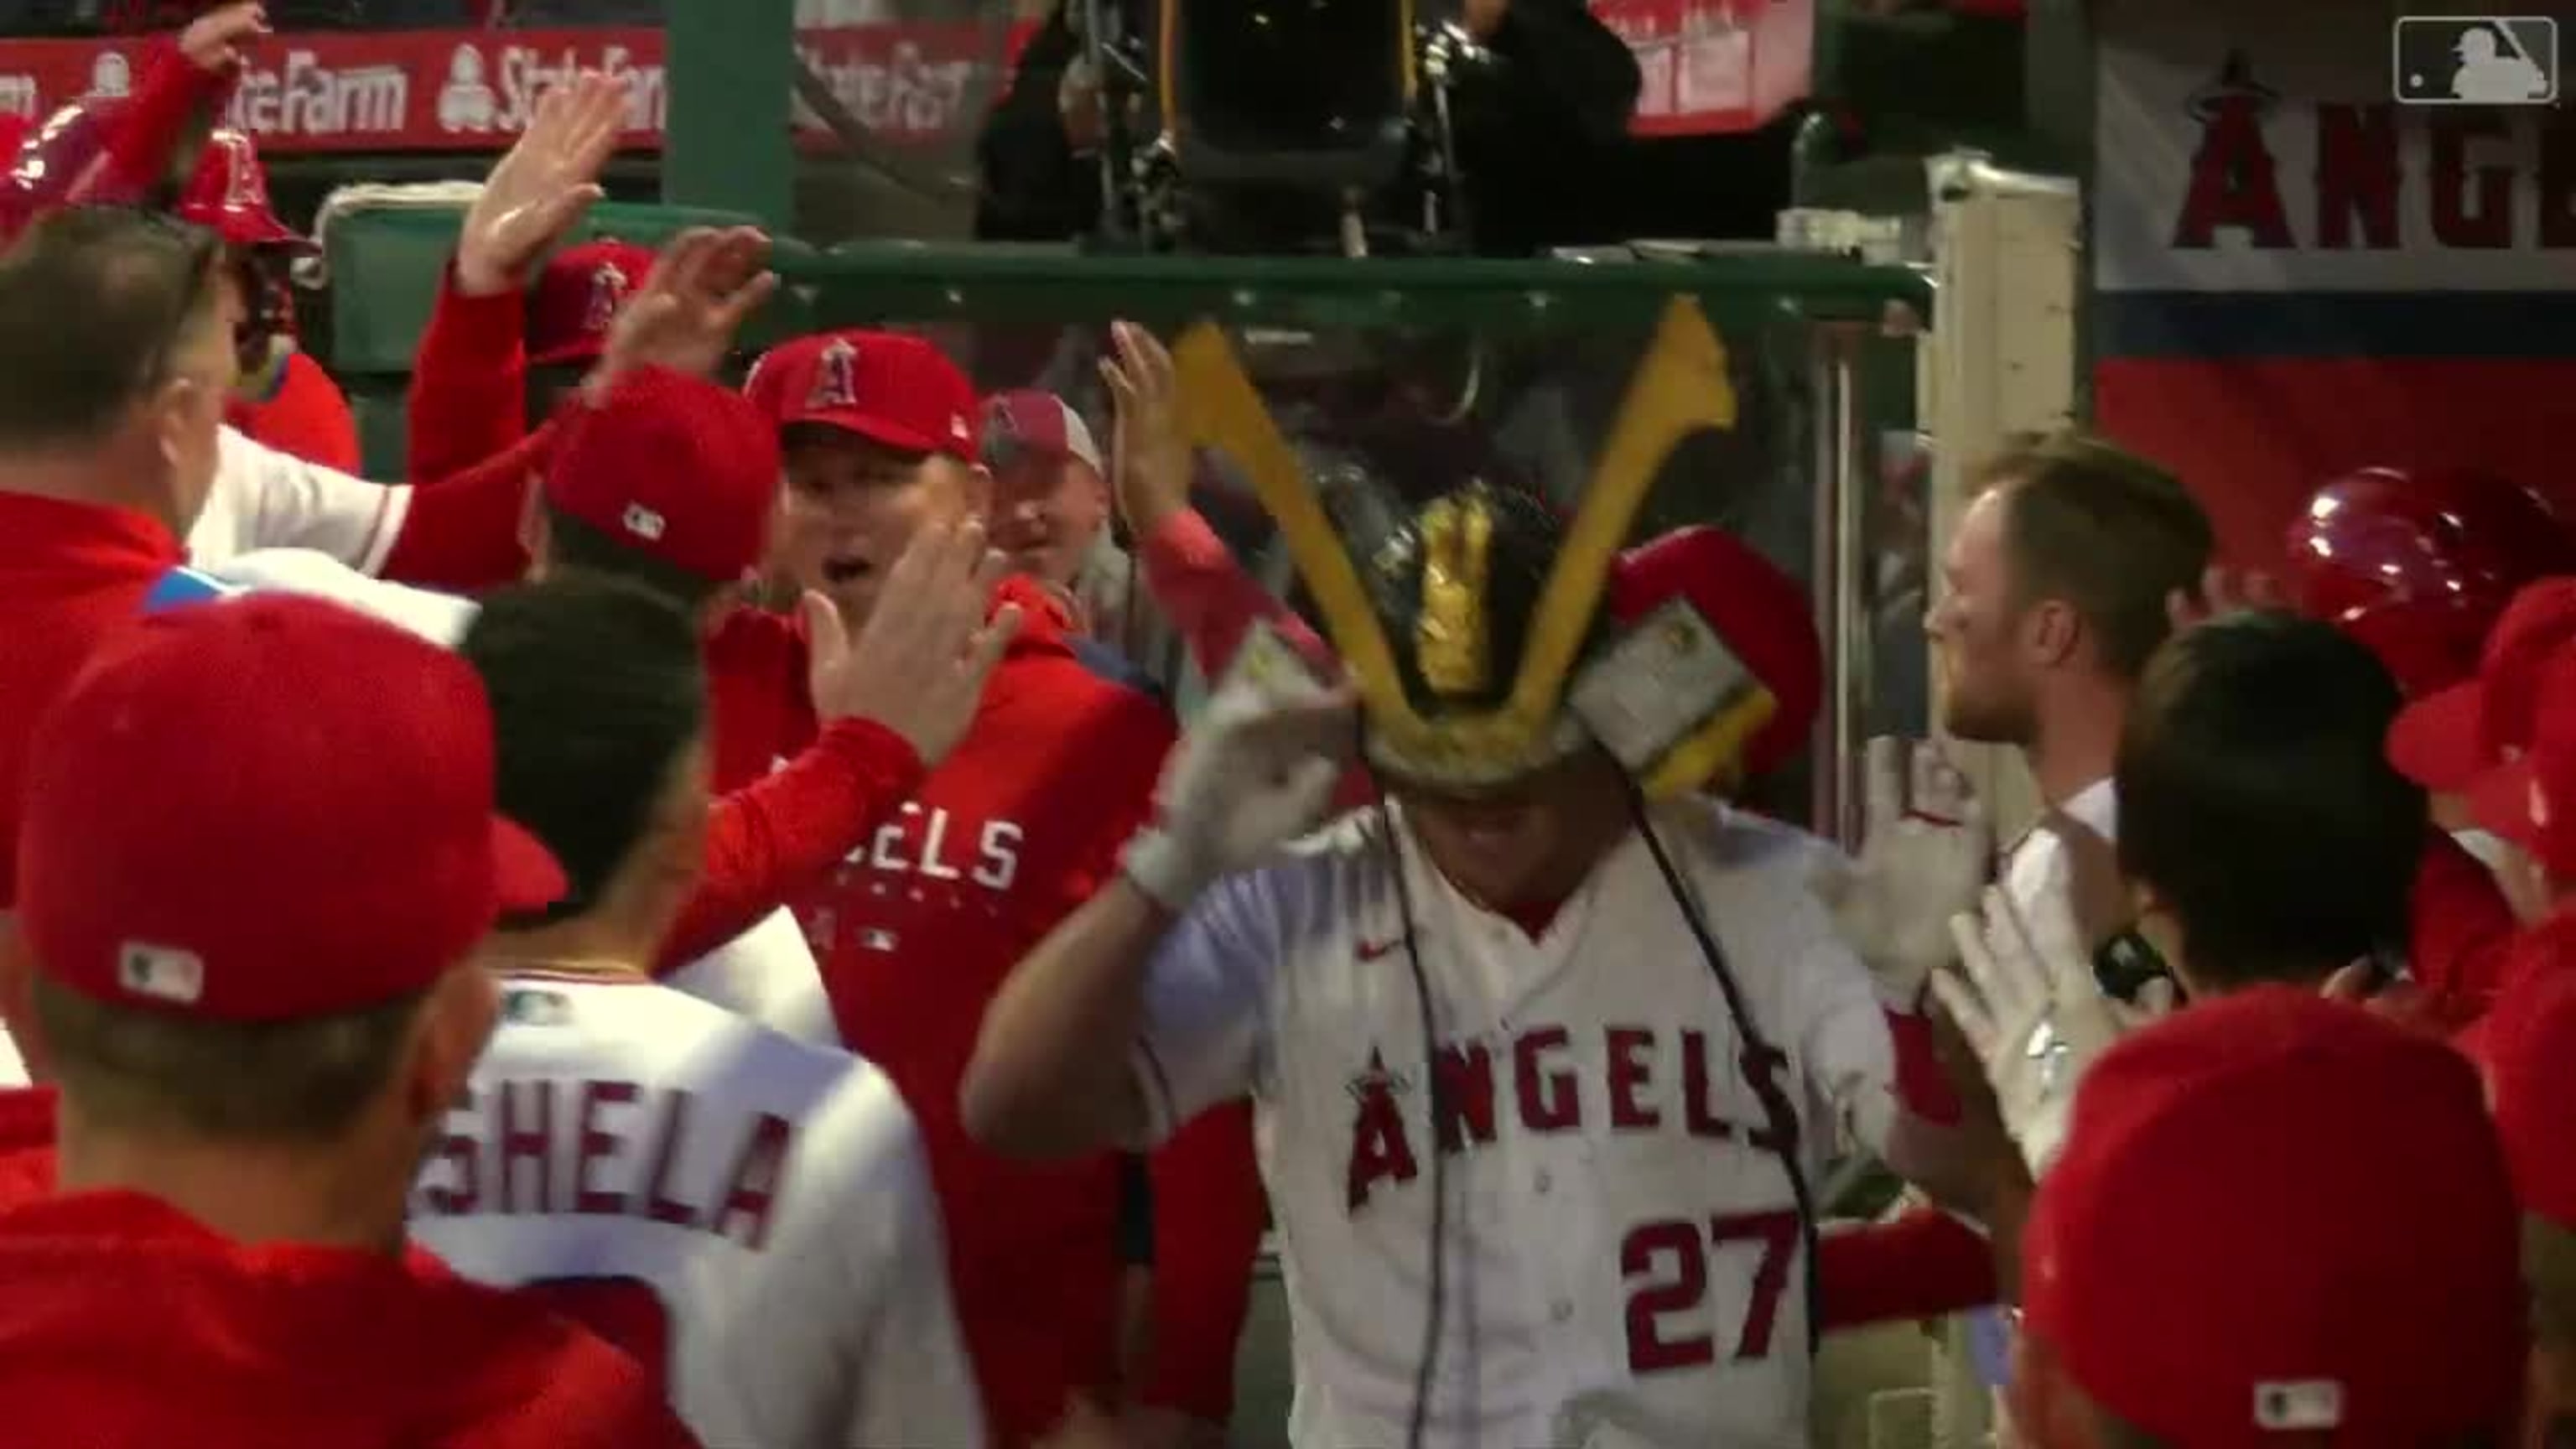 Angels have new home run celebration gear